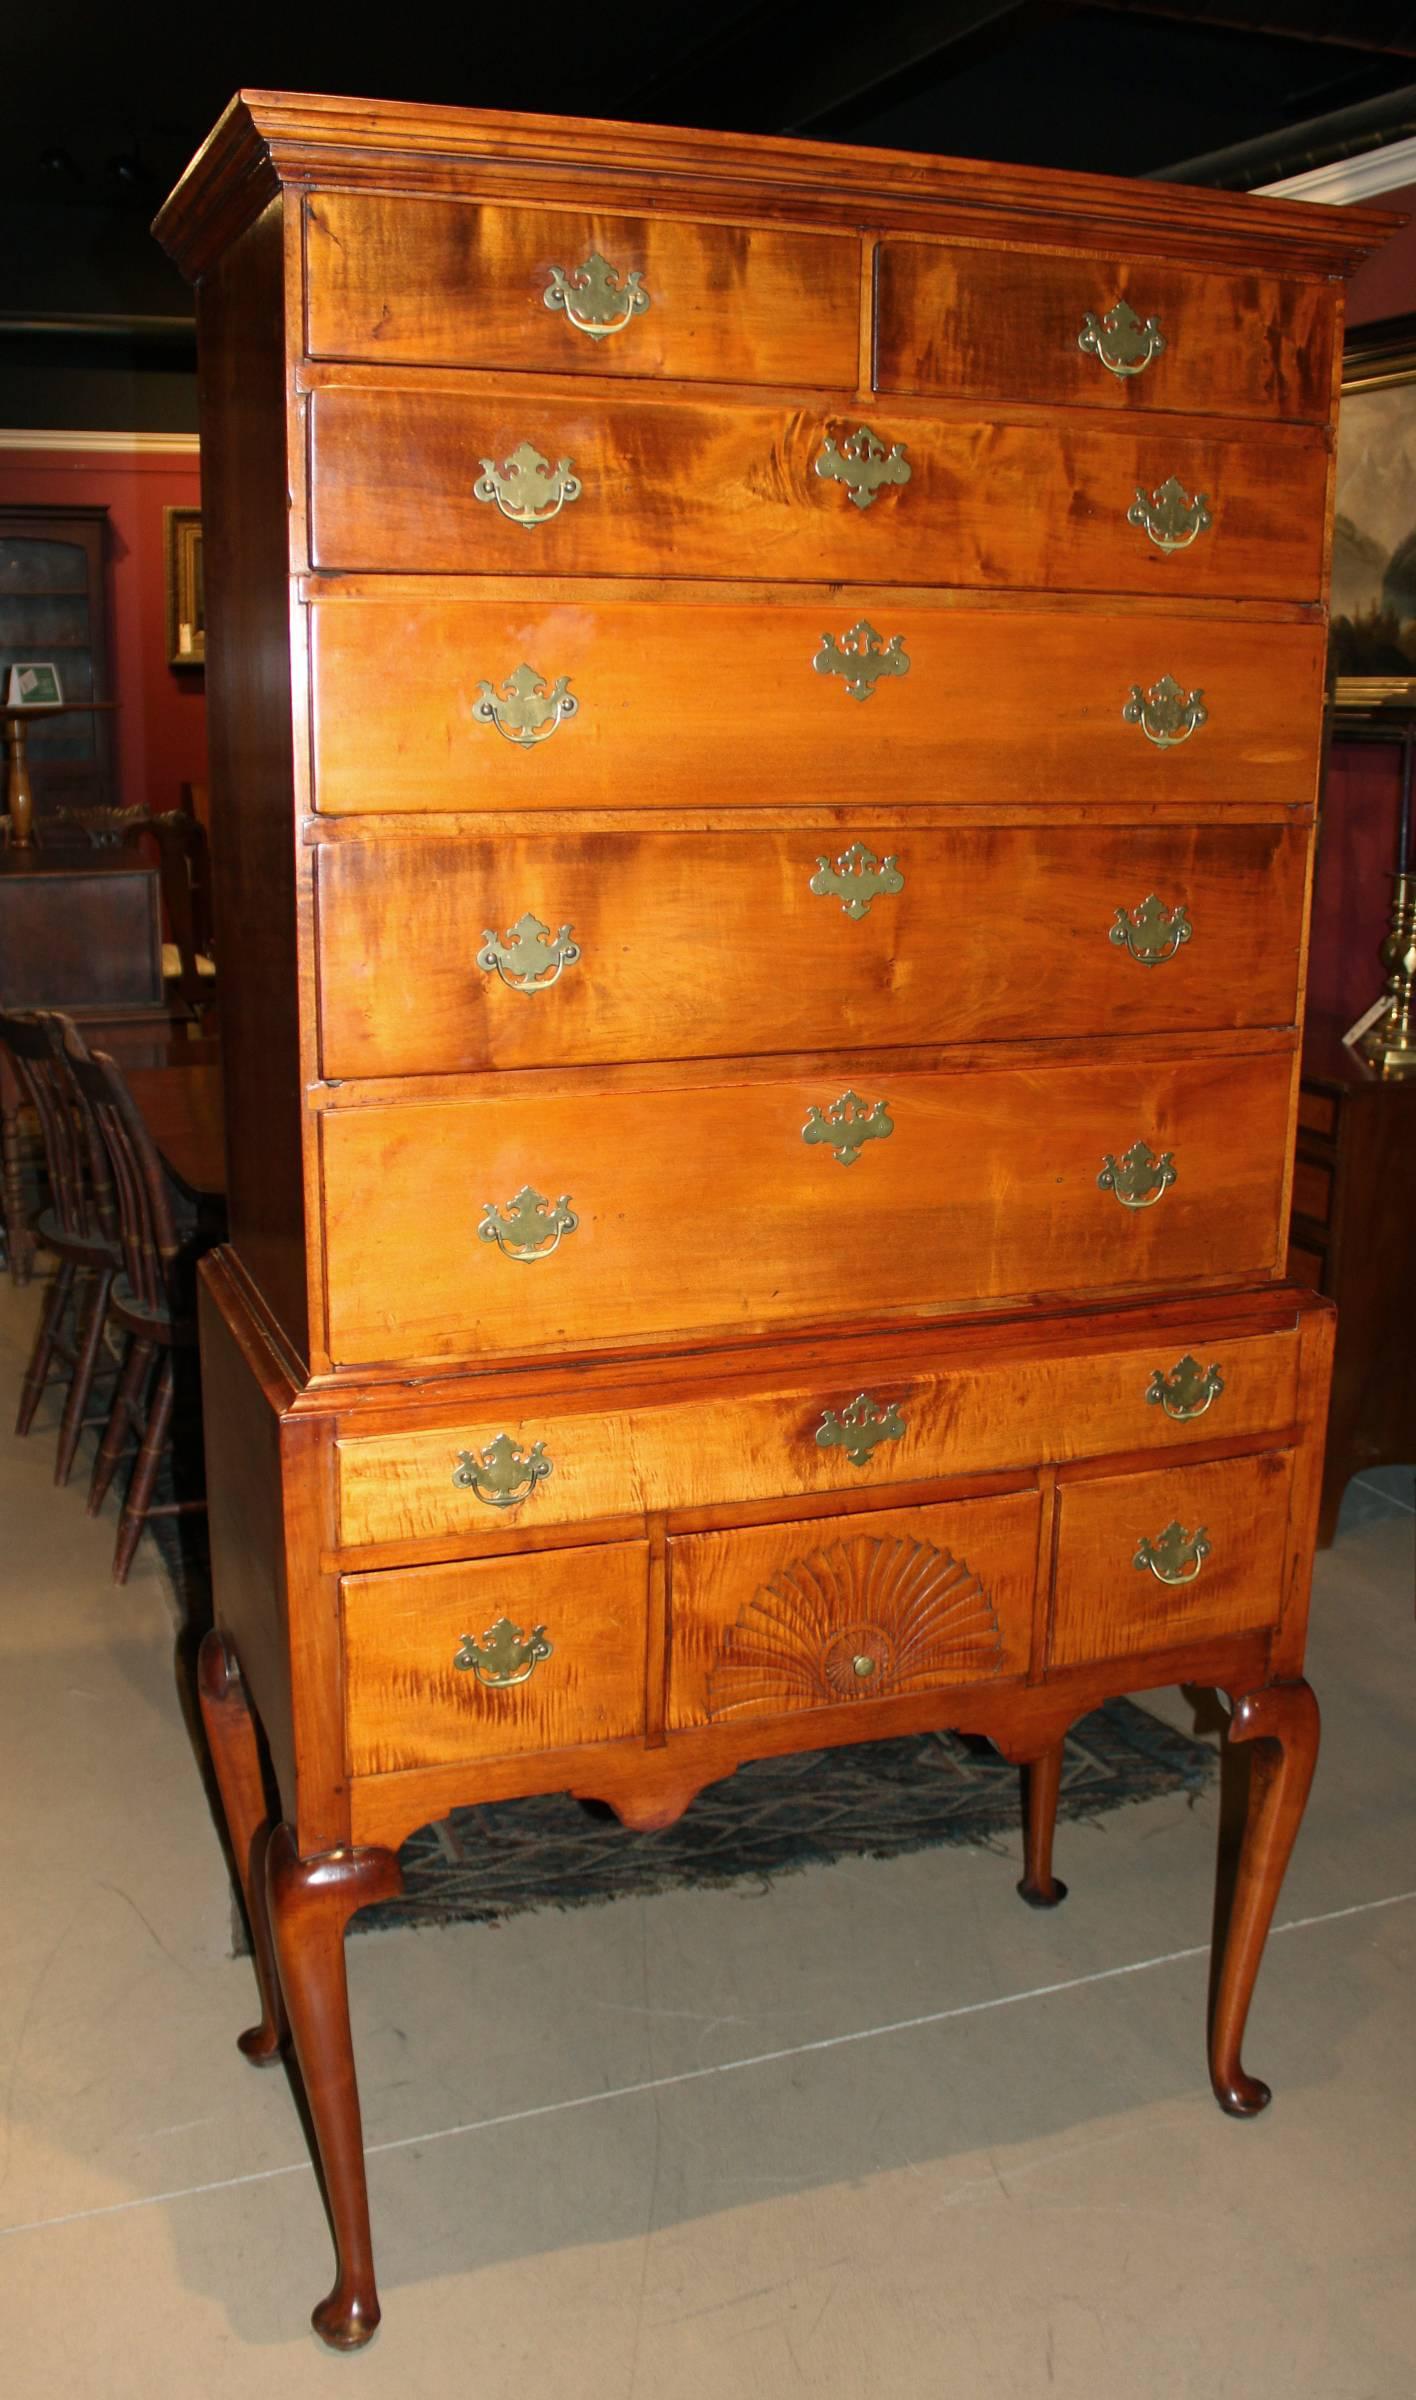 A fine curly maple highboy or high chest, attributed to Moses Hazen of Weare, New Hampshire, with an upper case of two over four drawers, supported by a lower case with one long drawer over three short drawers, the center with a linen fan and